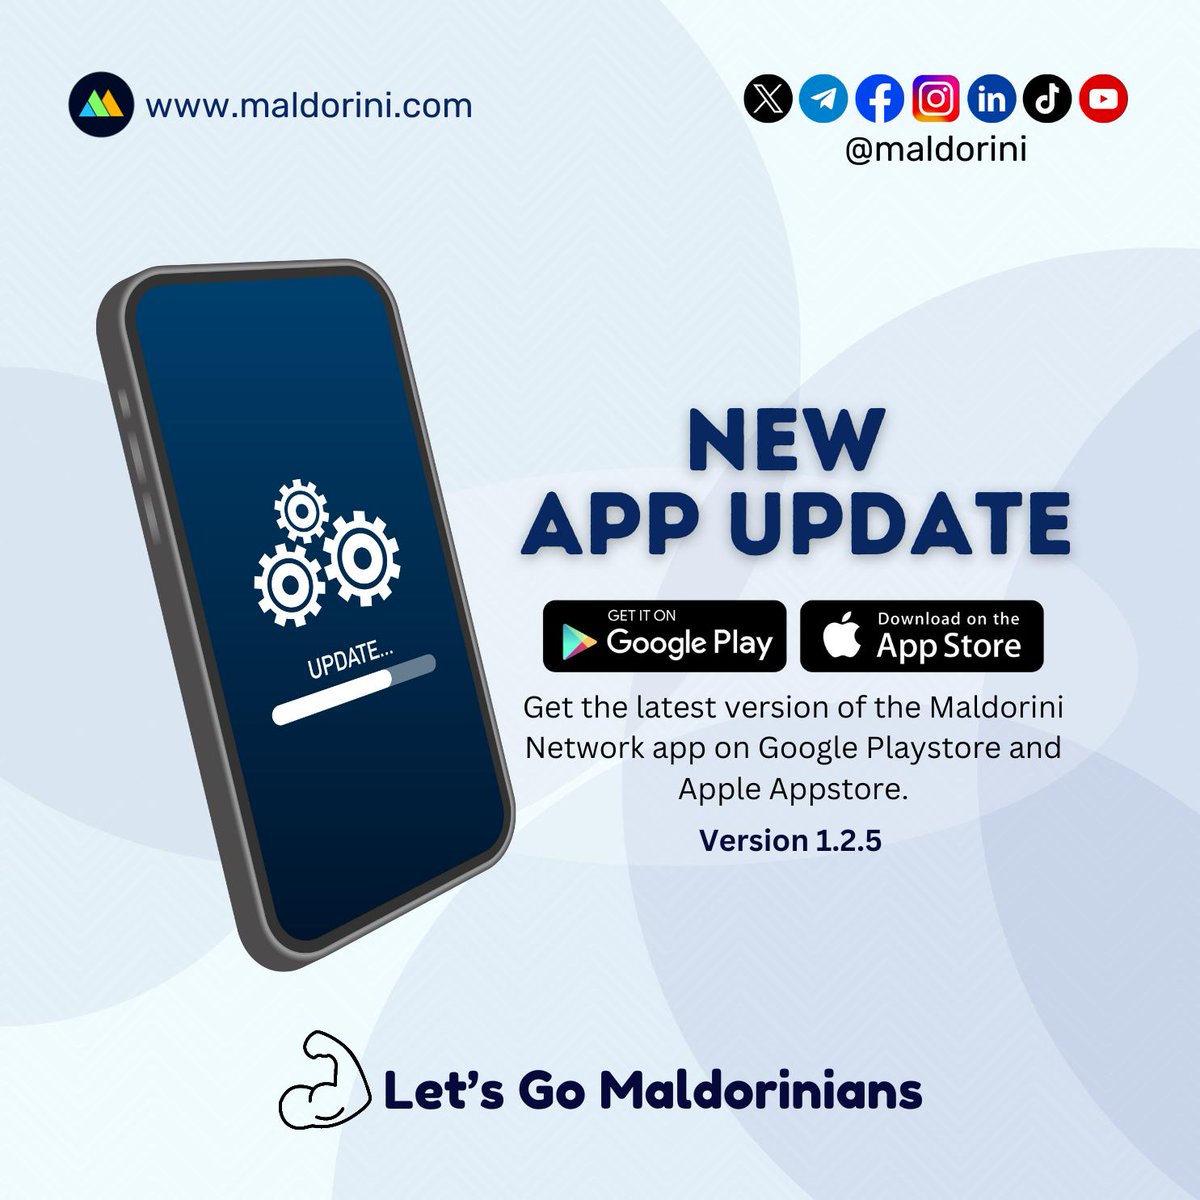 It's a Great day Maldorinians... Update your Maldorini Network app version or directly download the latest Maldorini Network app version on Google Playstore or Apple Appstore now. 💪Let's Go Maldorinians #Maldorini #Maldorinians #Maldo #MLD #blockchain #Ethereum #Bitcoin